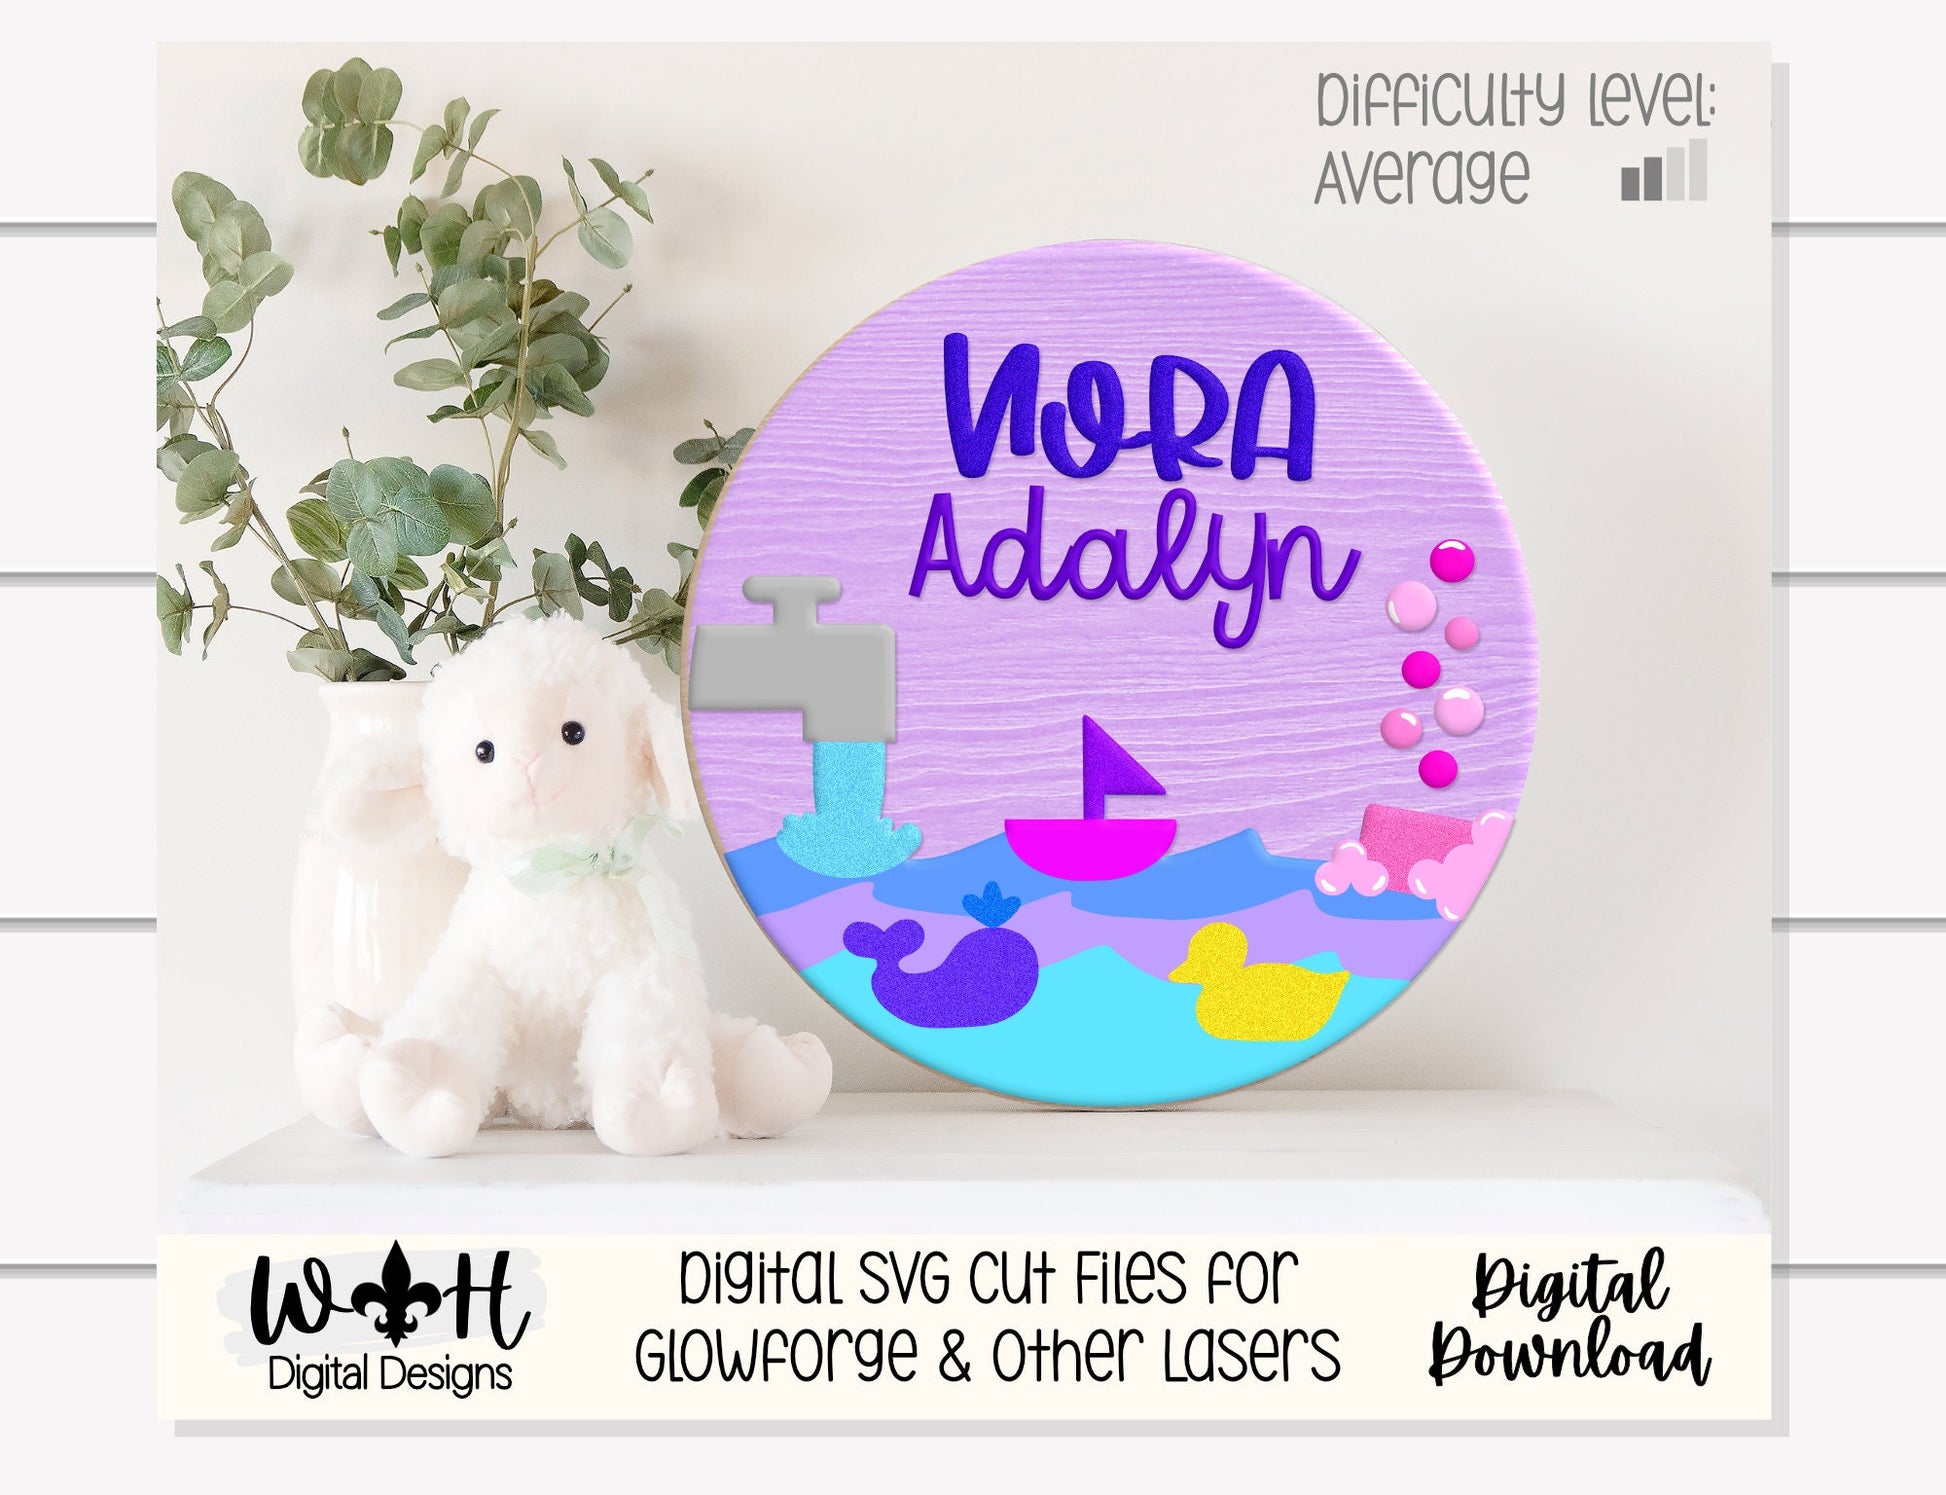 Bathtub Time Bubble Bath Baby Nursery Round - Sign Making Home Decor and DIY Kits - Cut File For Glowforge Lasers - Digital SVG File